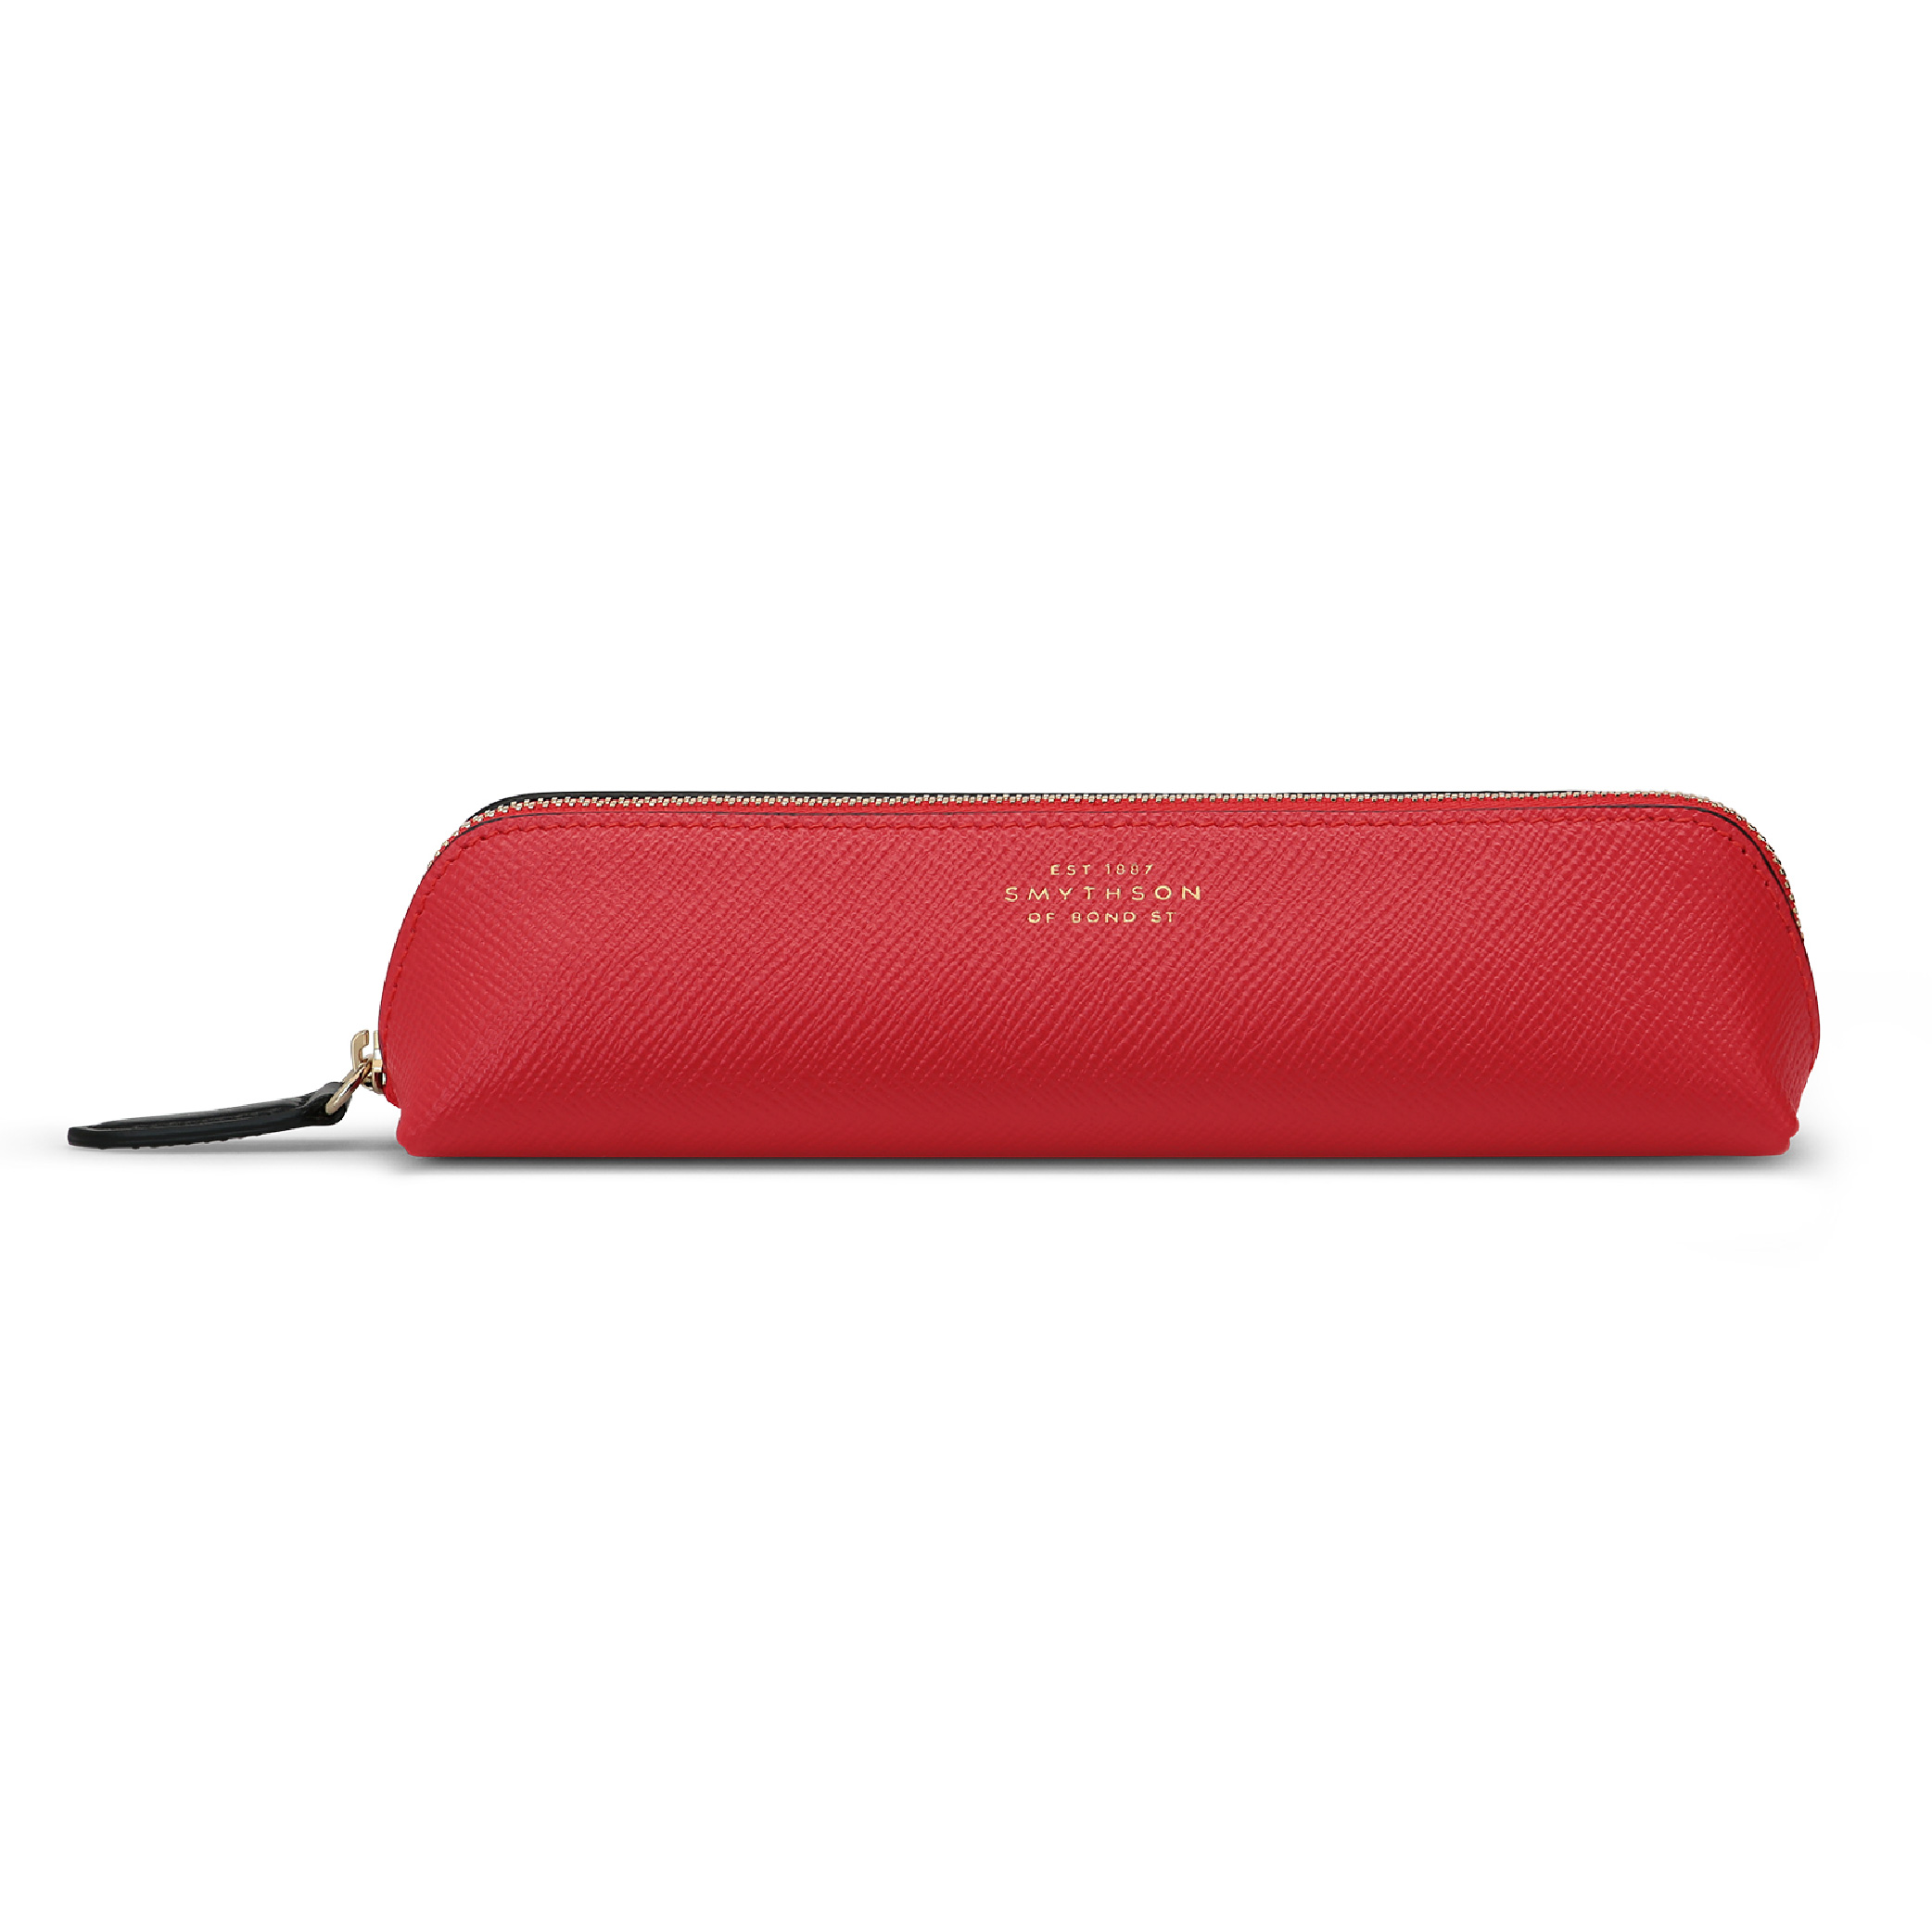 SMYTHSON Scarlet Red Pencil Case in Panama - Style of Zug